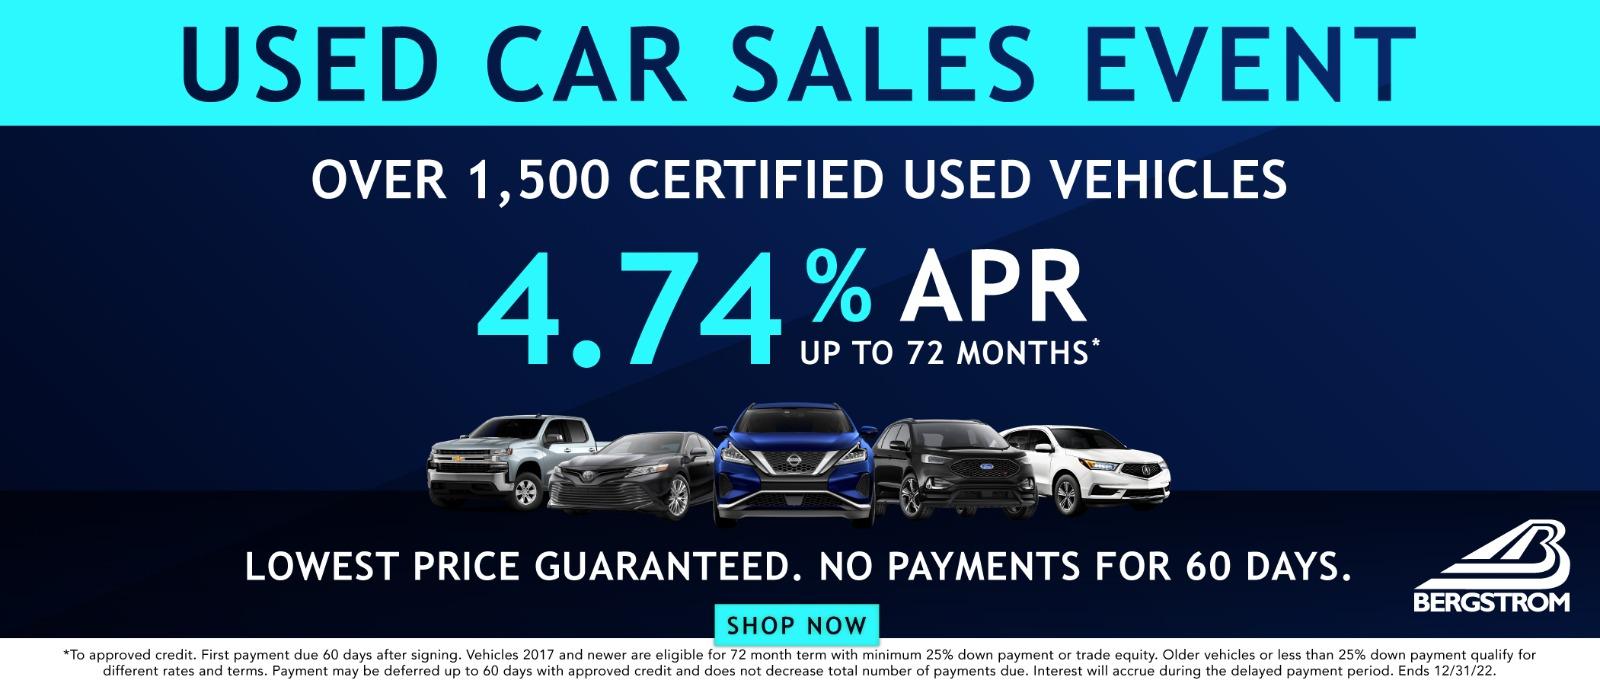 Used Car Sales Event Over 1,500 Certified used vehicles 4.47% APR up to 72 months